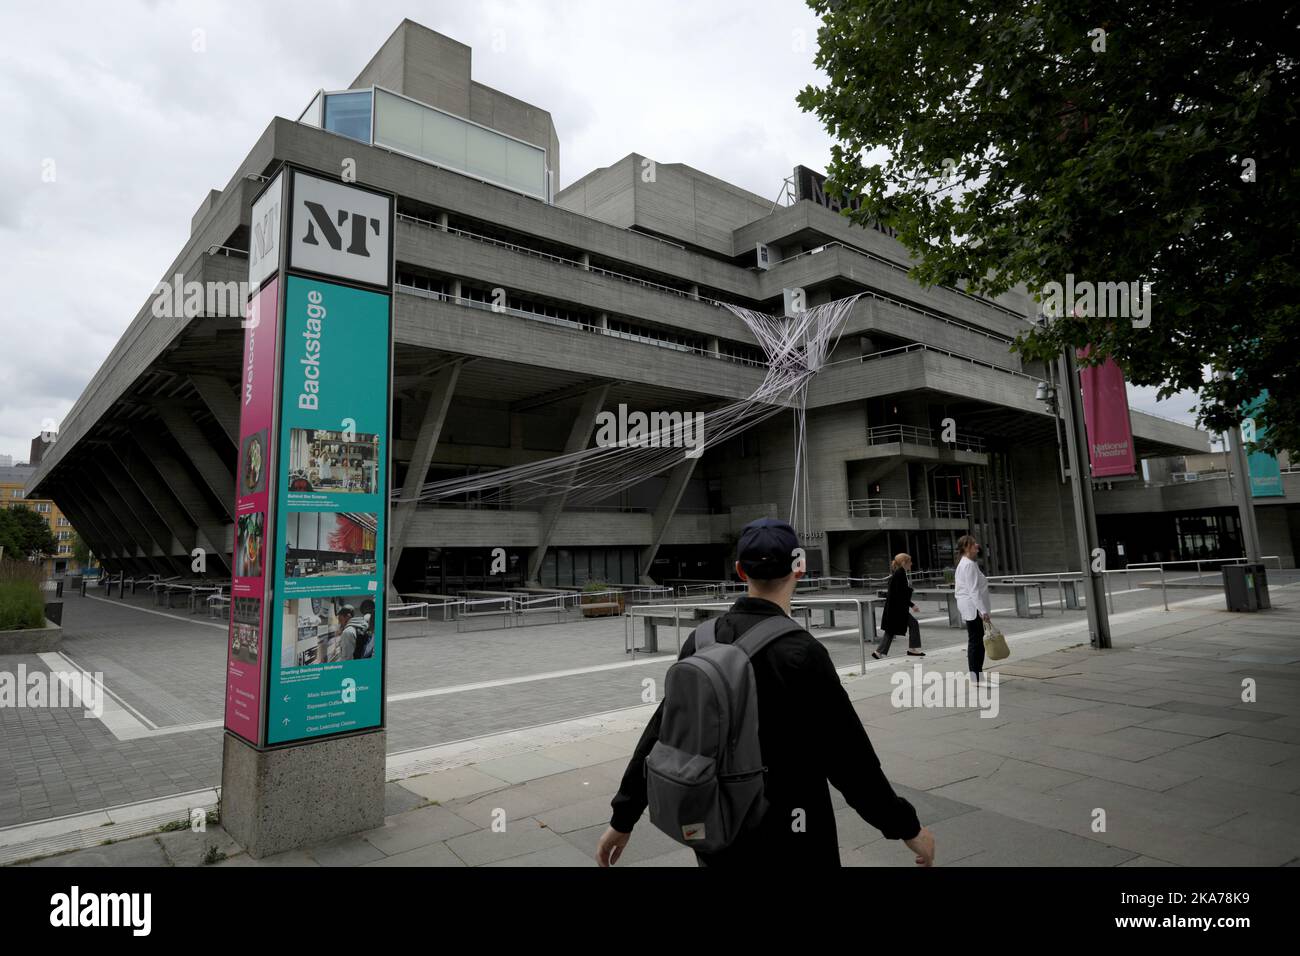 (200707) -- LONDON, July 7, 2020 (Xinhua) -- A man walks past the National Theater wrapped with tapes in London, Britain, on July 7, 2020. Britain's arts, culture and heritage industries will receive a 1.57-billion-pound (1.96-billion-U.S. dollar) rescue package to help weather the impact of the coronavirus pandemic, the government has announced. (Photo by Tim Ireland/Xinhua) Stock Photo